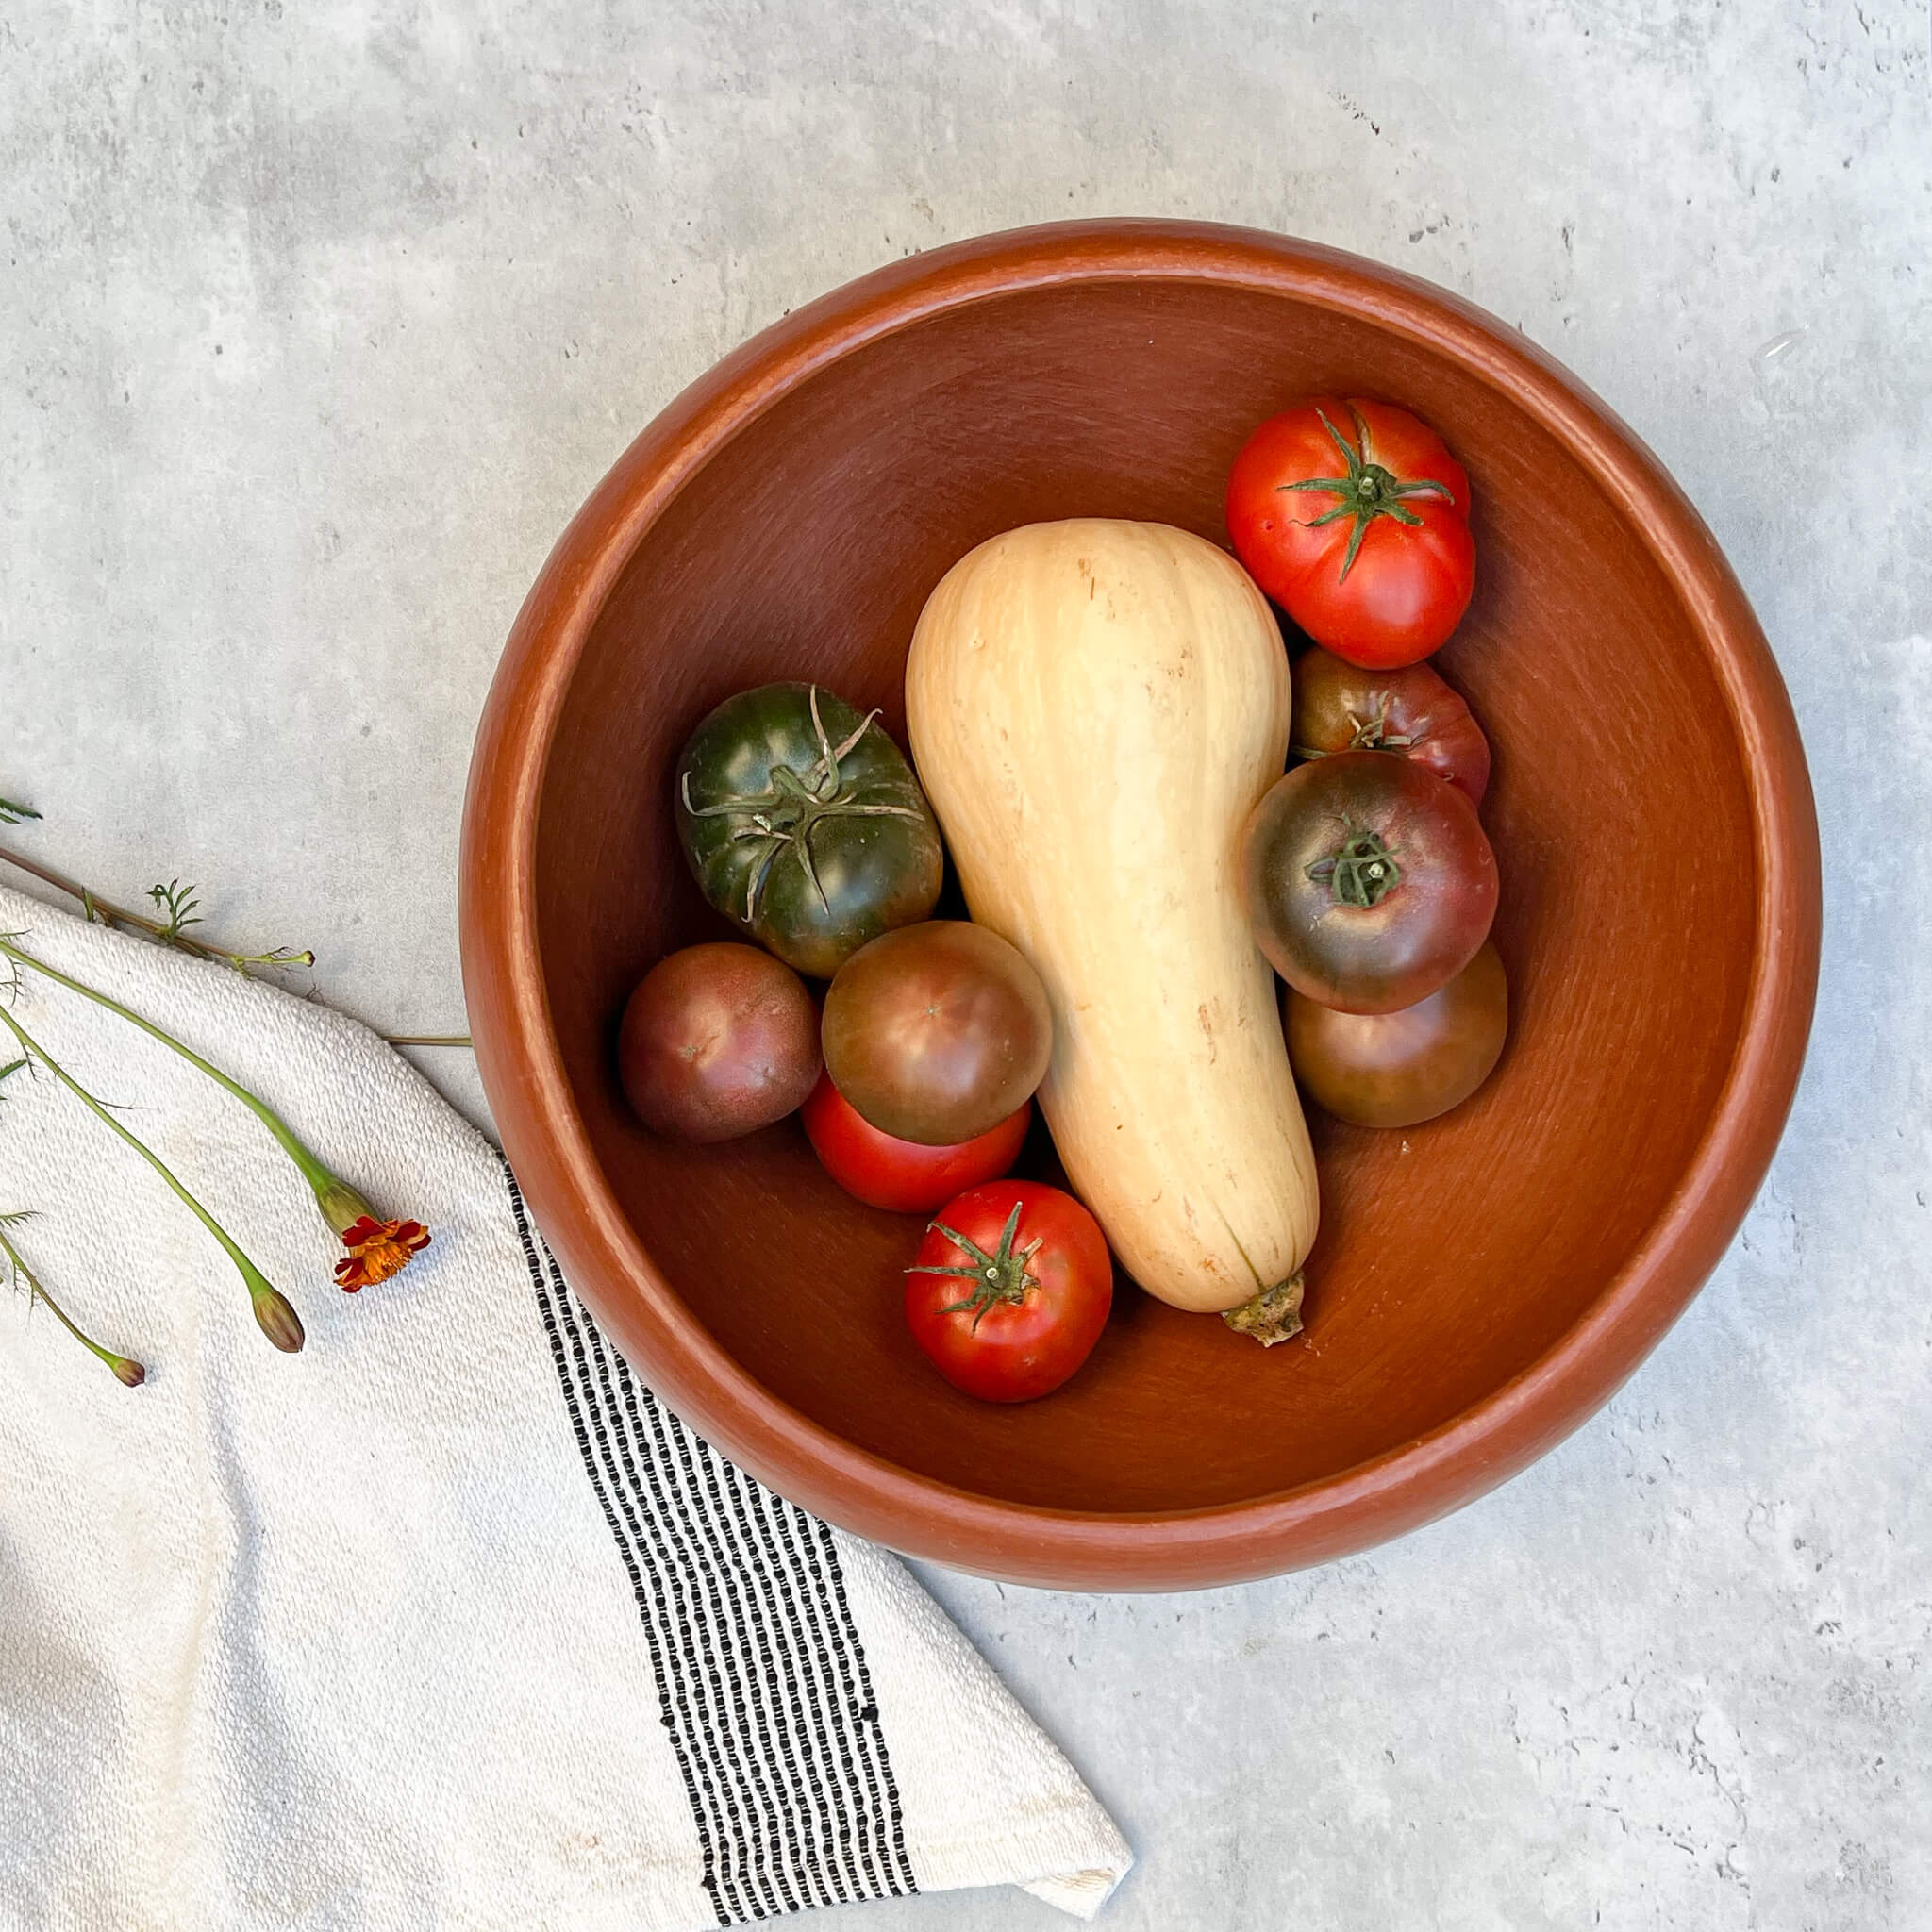 A 12 inch Oaxaca large red clay bowl with a butternut squash and tomatoes